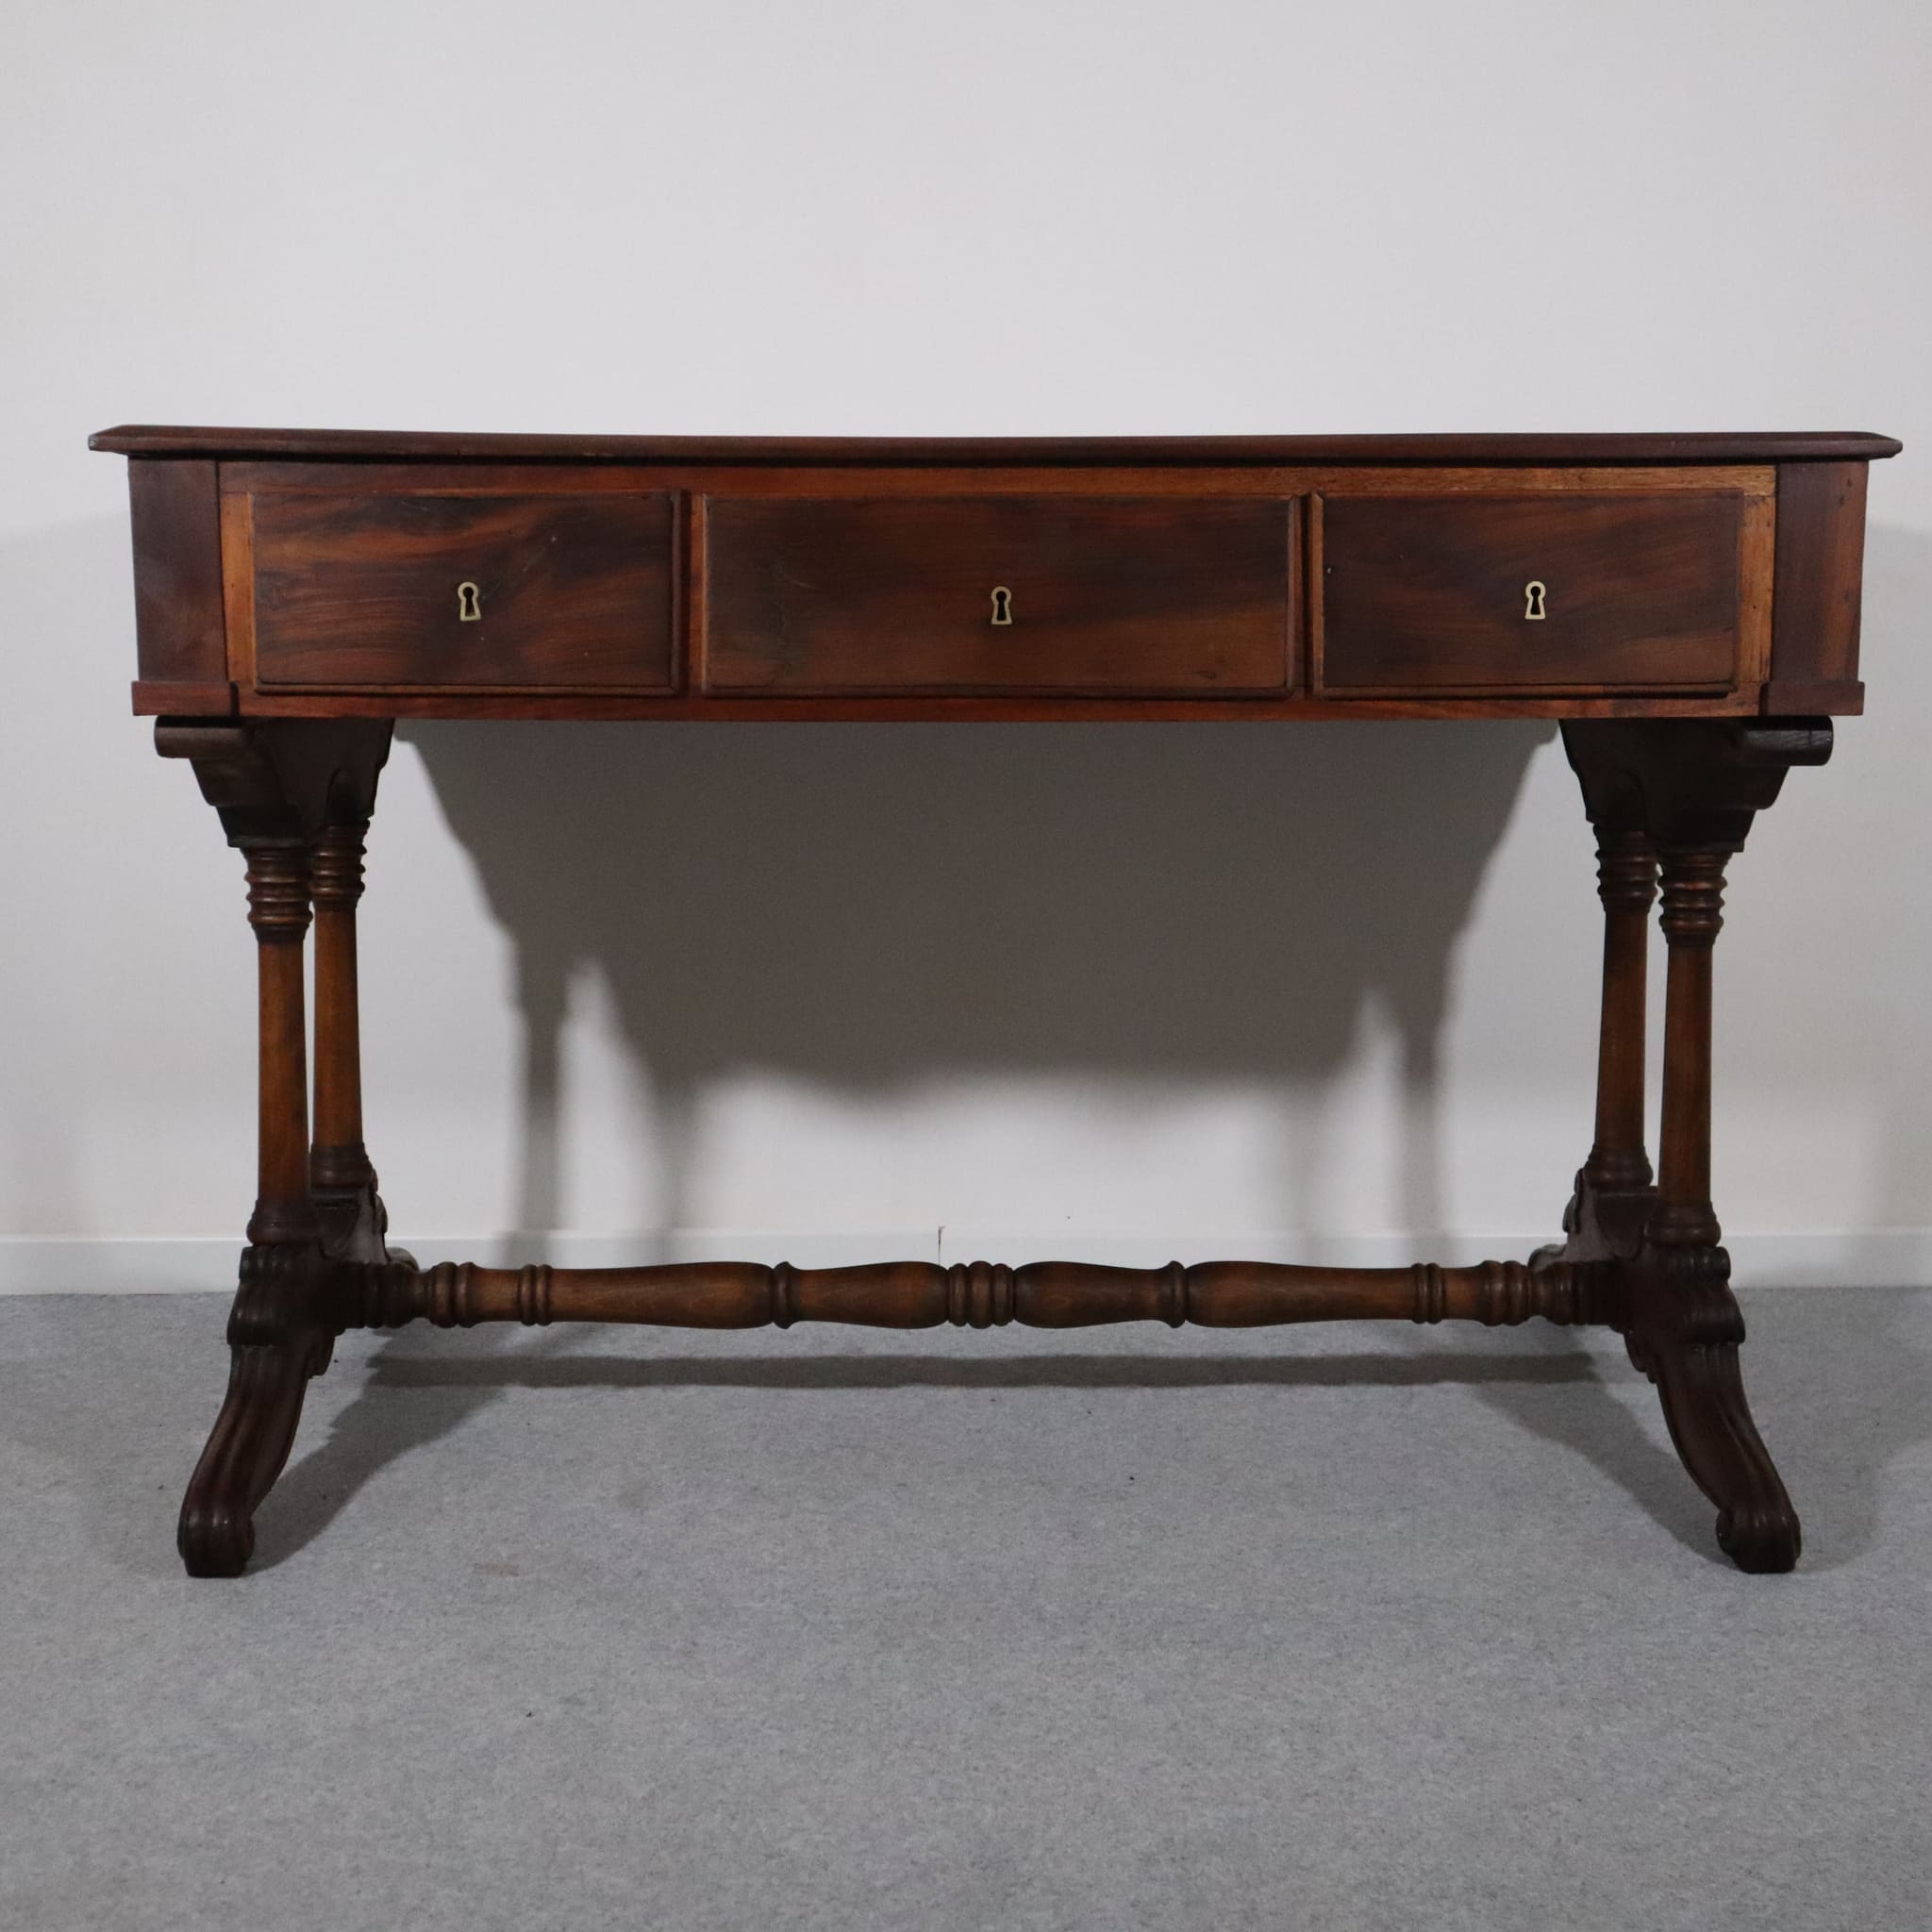 vintage visions-antiques-tables-writing-table-in-solid-walnut-period-1870-luigi-filippo-siciliano-front-view-2